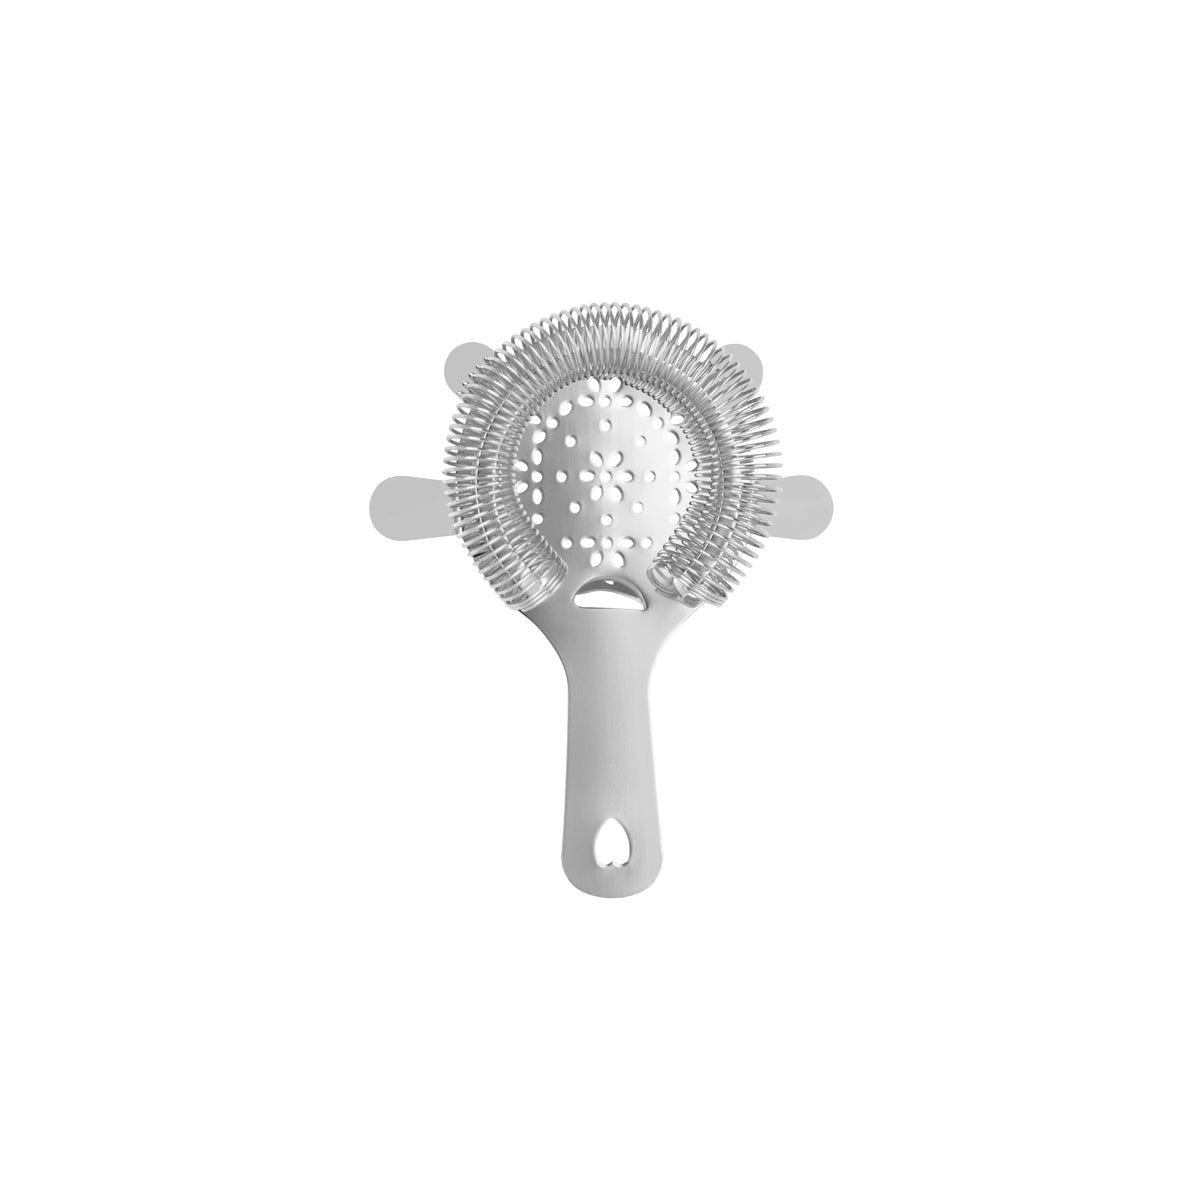 Hawthorn Strainer from Zanzi. Packed in a gift box and sold in boxes of 1. Hospitality quality at wholesale price with The Flying Fork! 